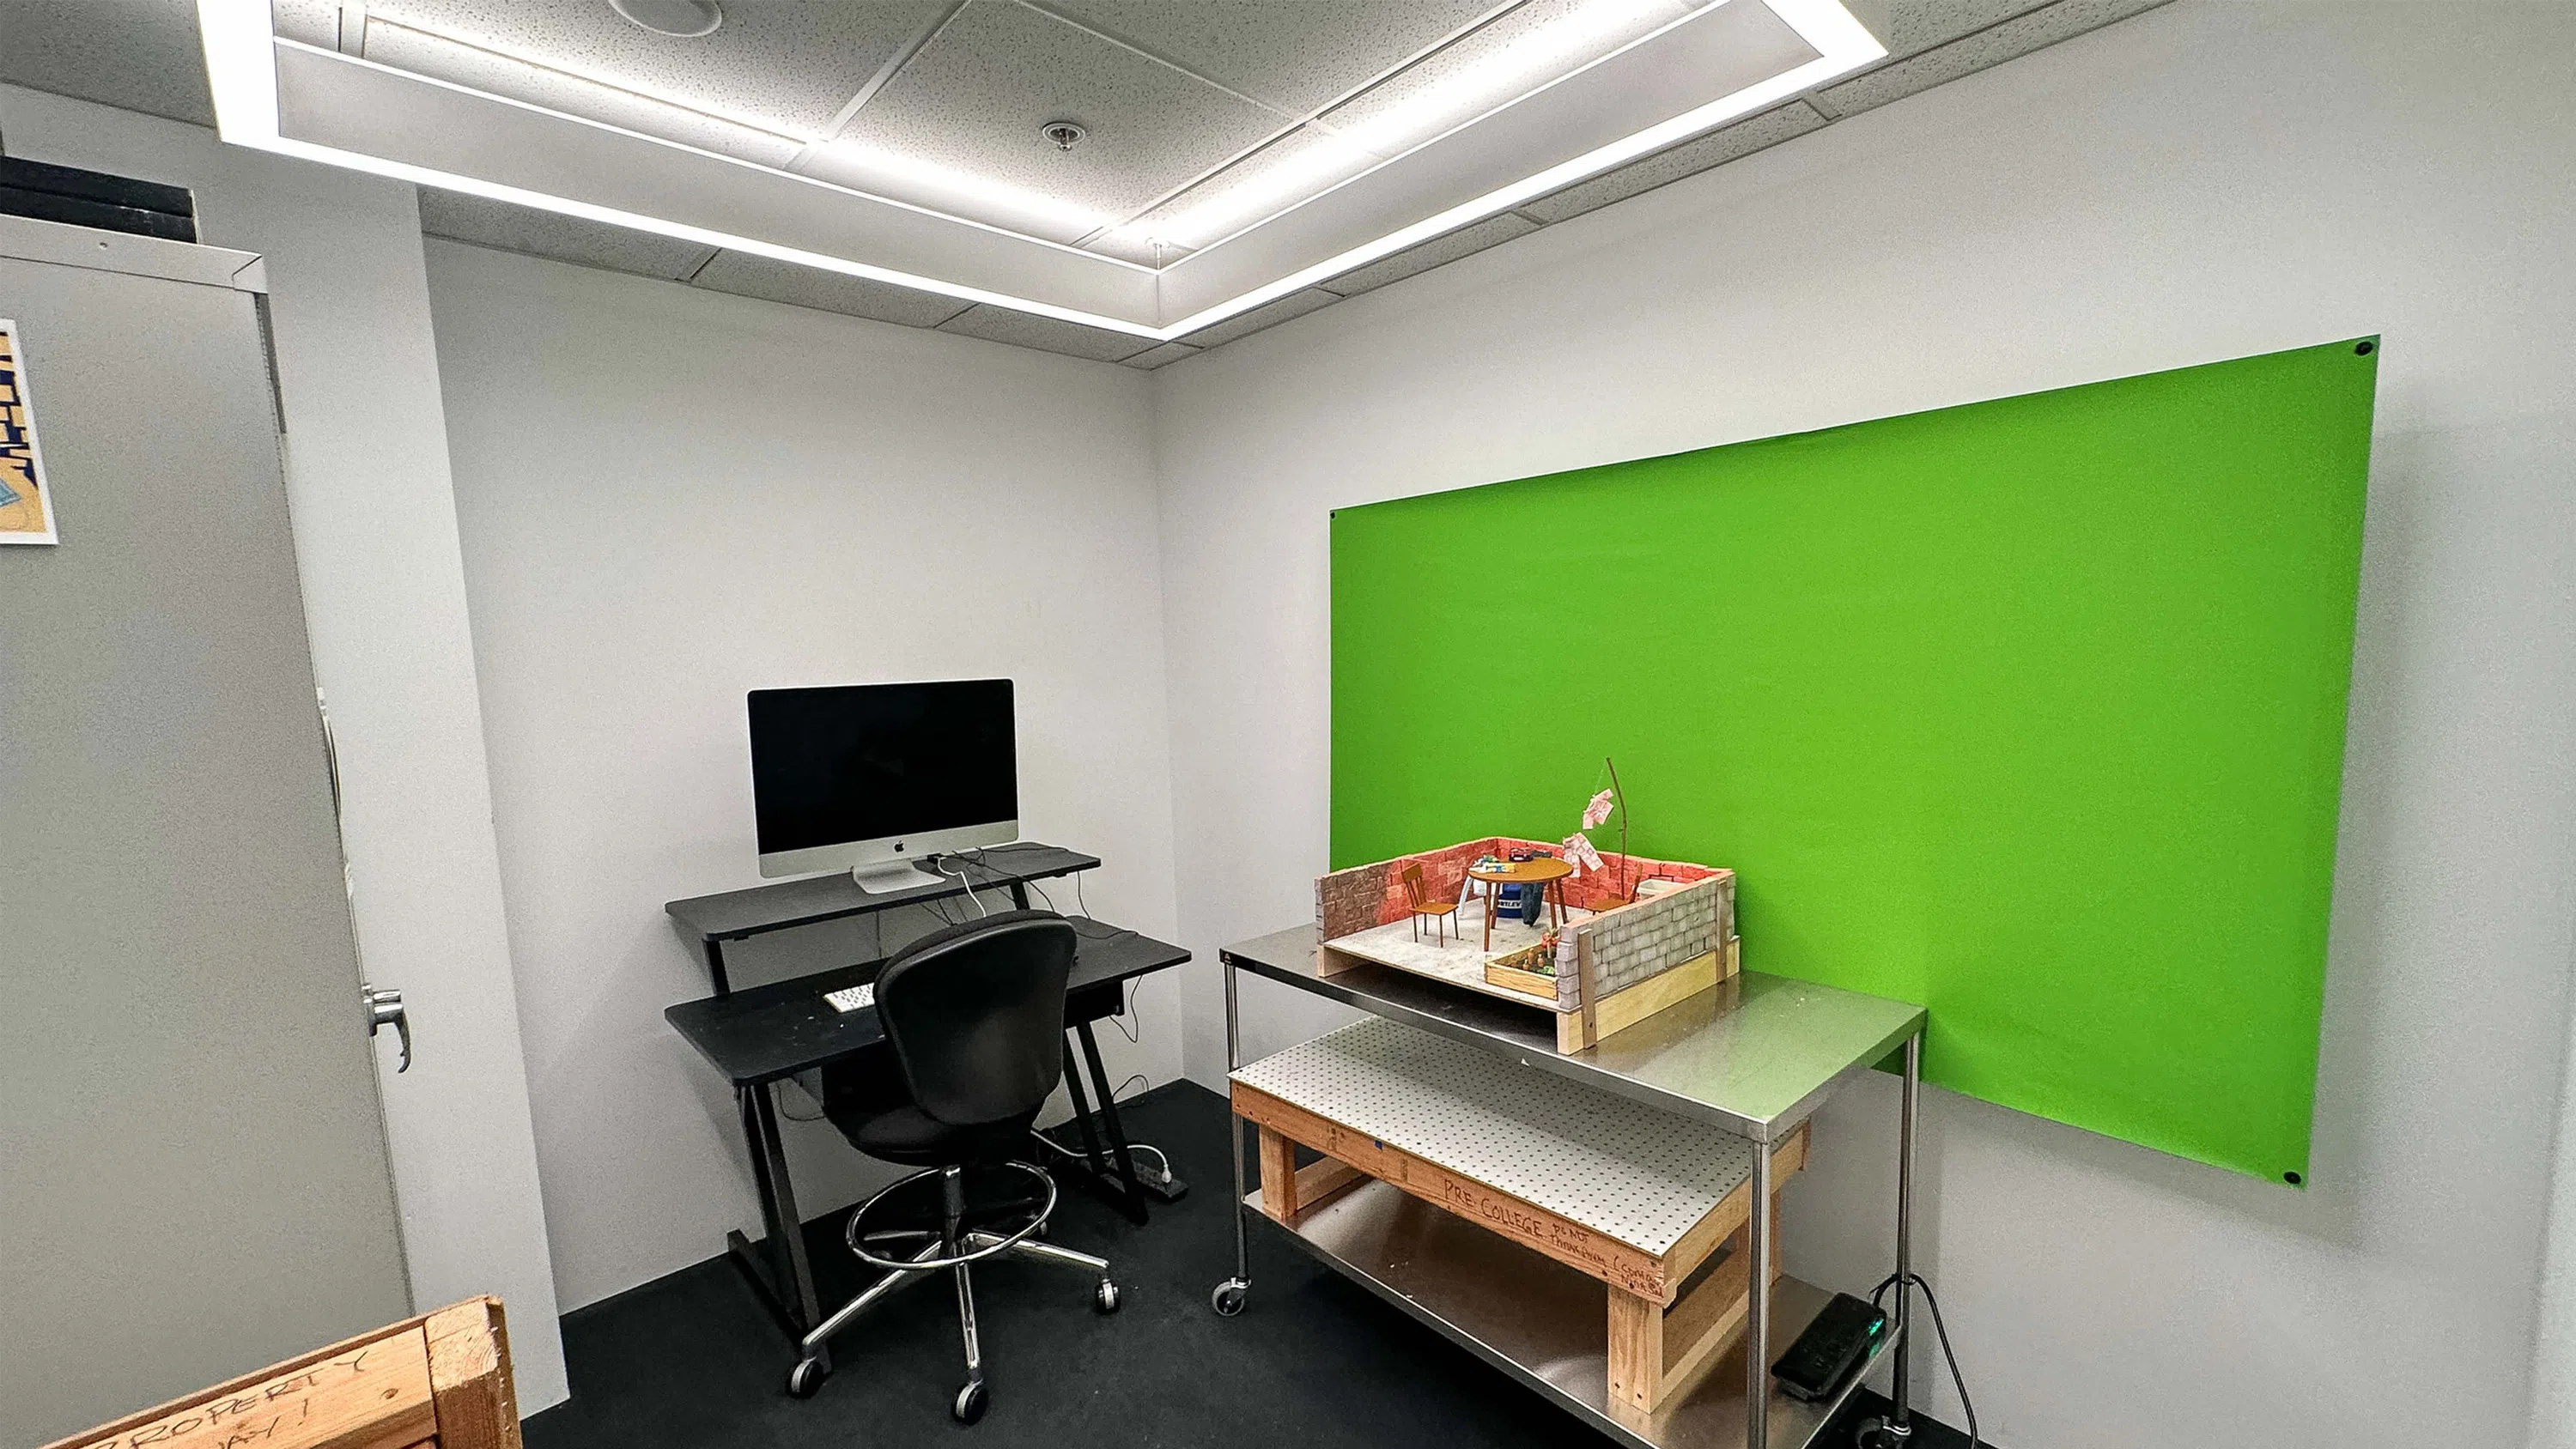 A small room with a green screen, iMac computer, and a model for a stop motion animation project. 